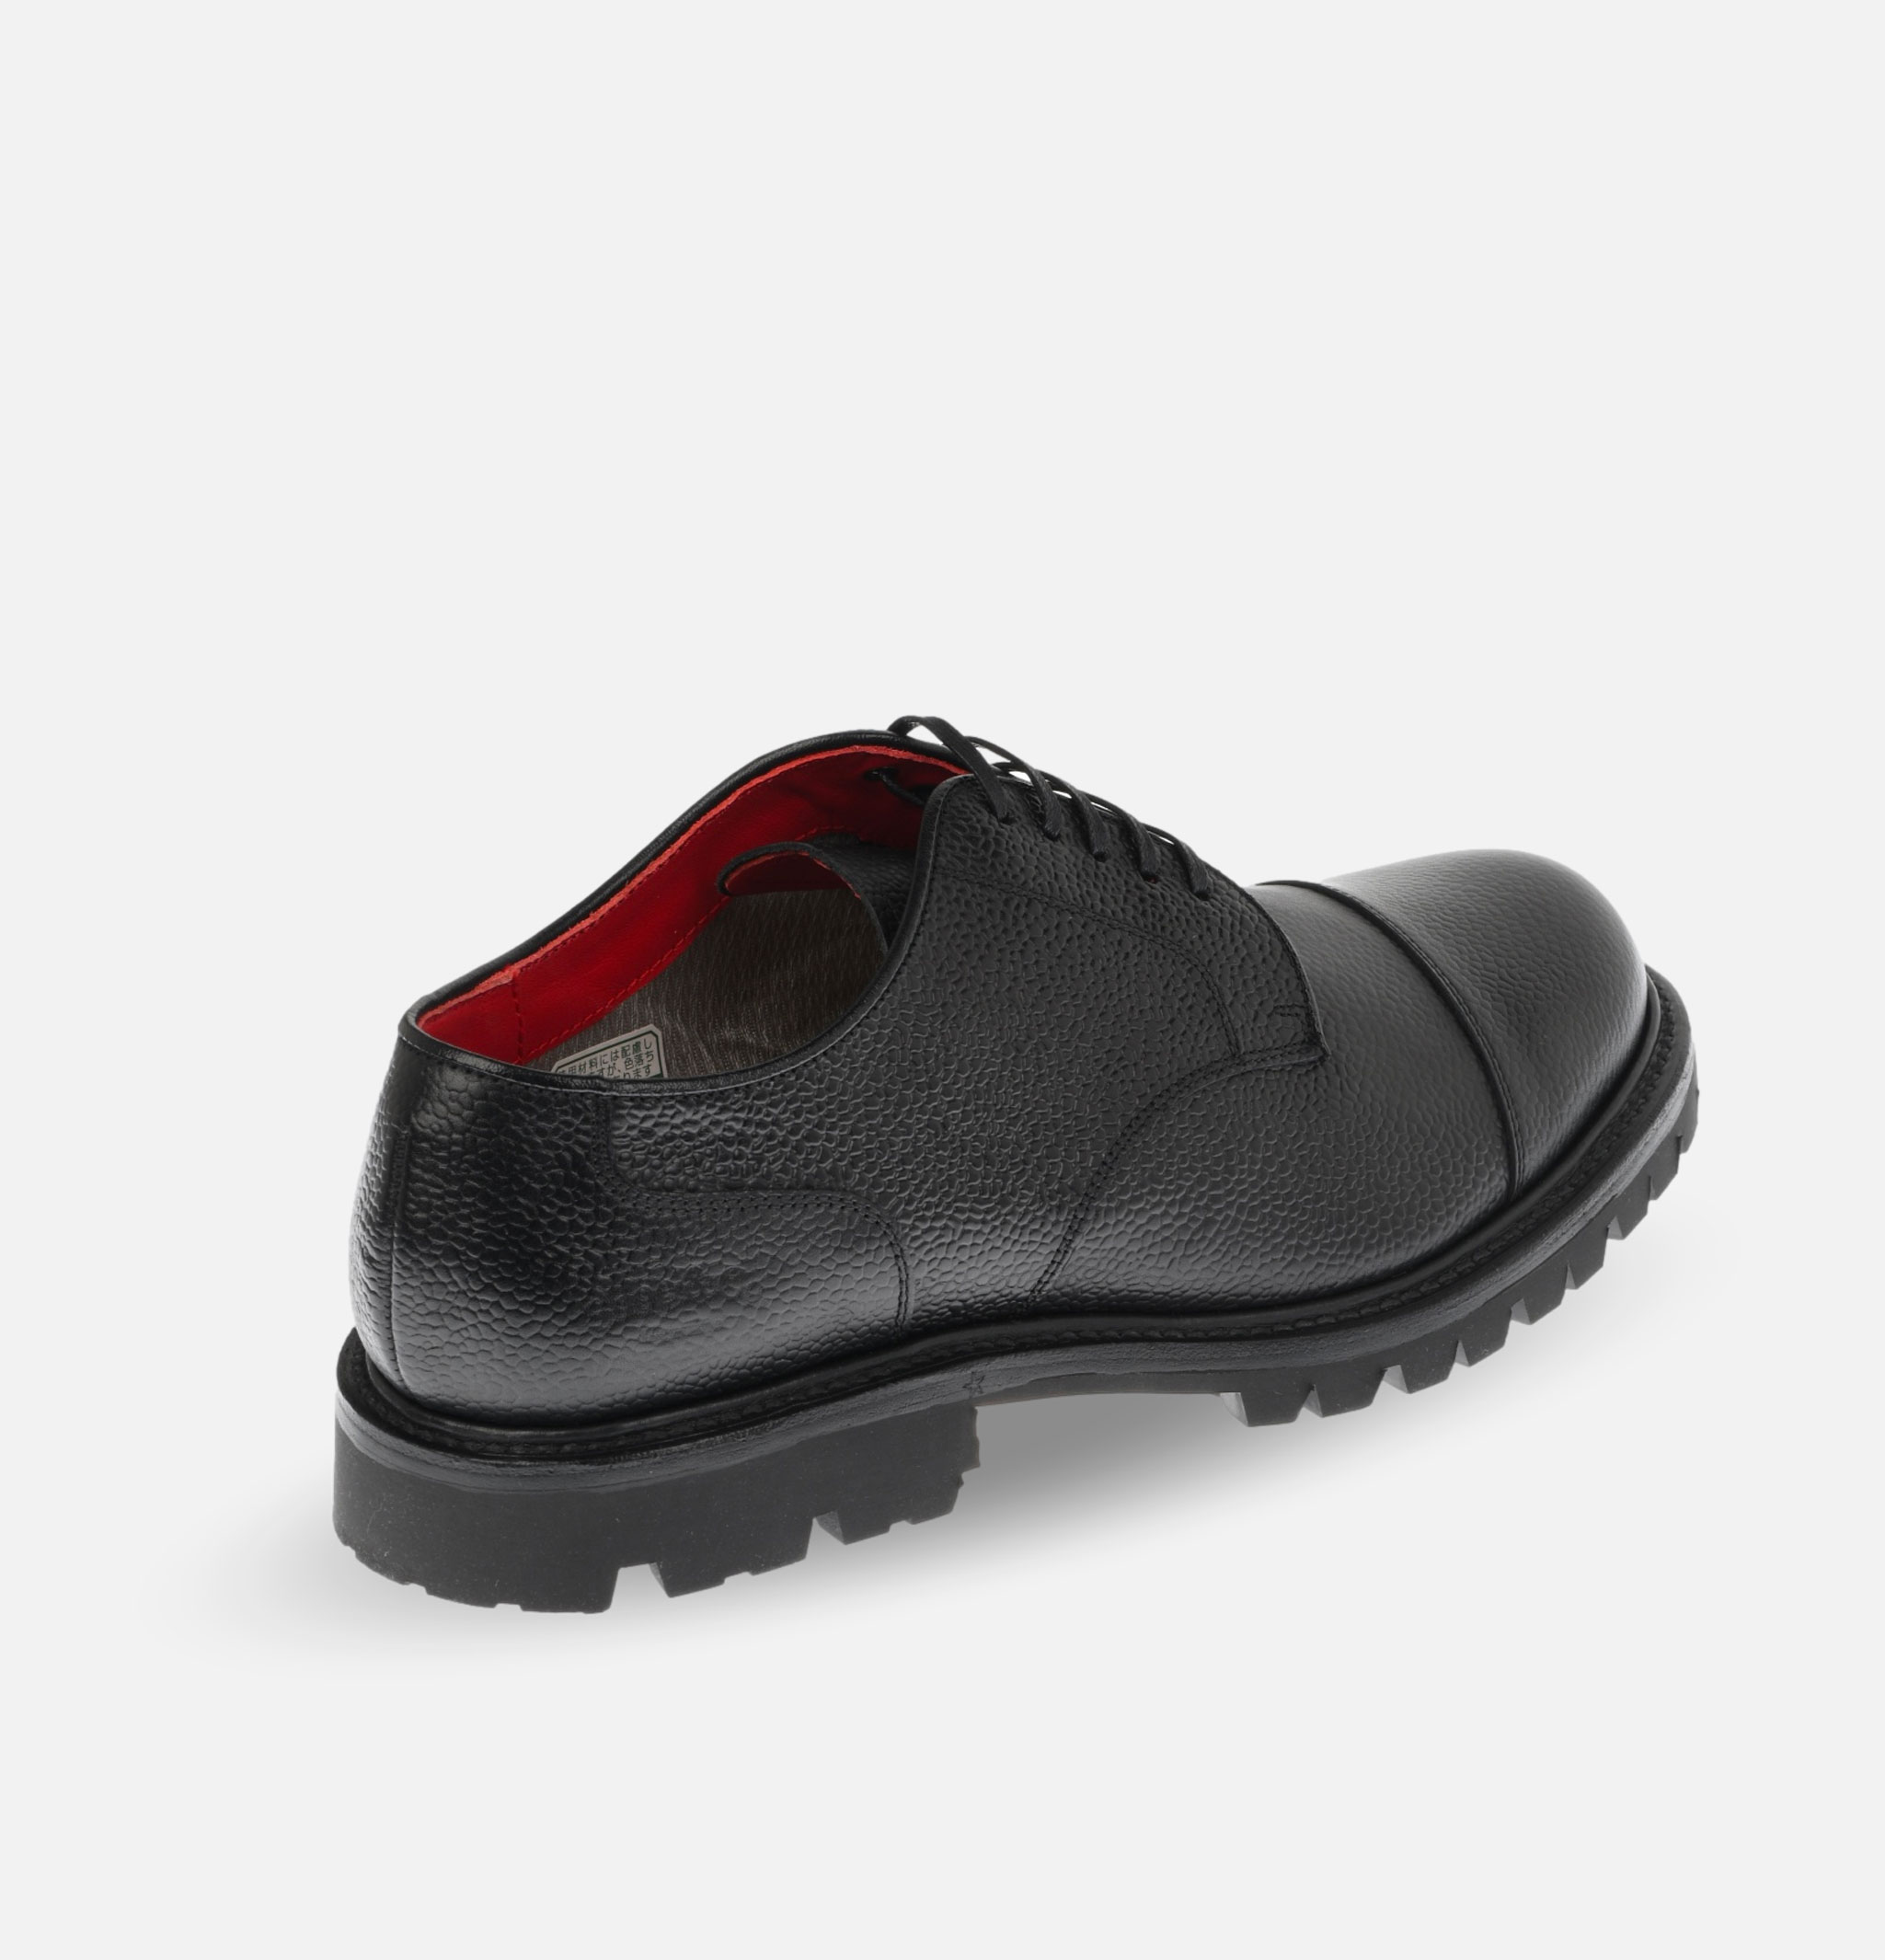 Chaussures Regal Shoe & Co Straight Tip Black Gore-tex